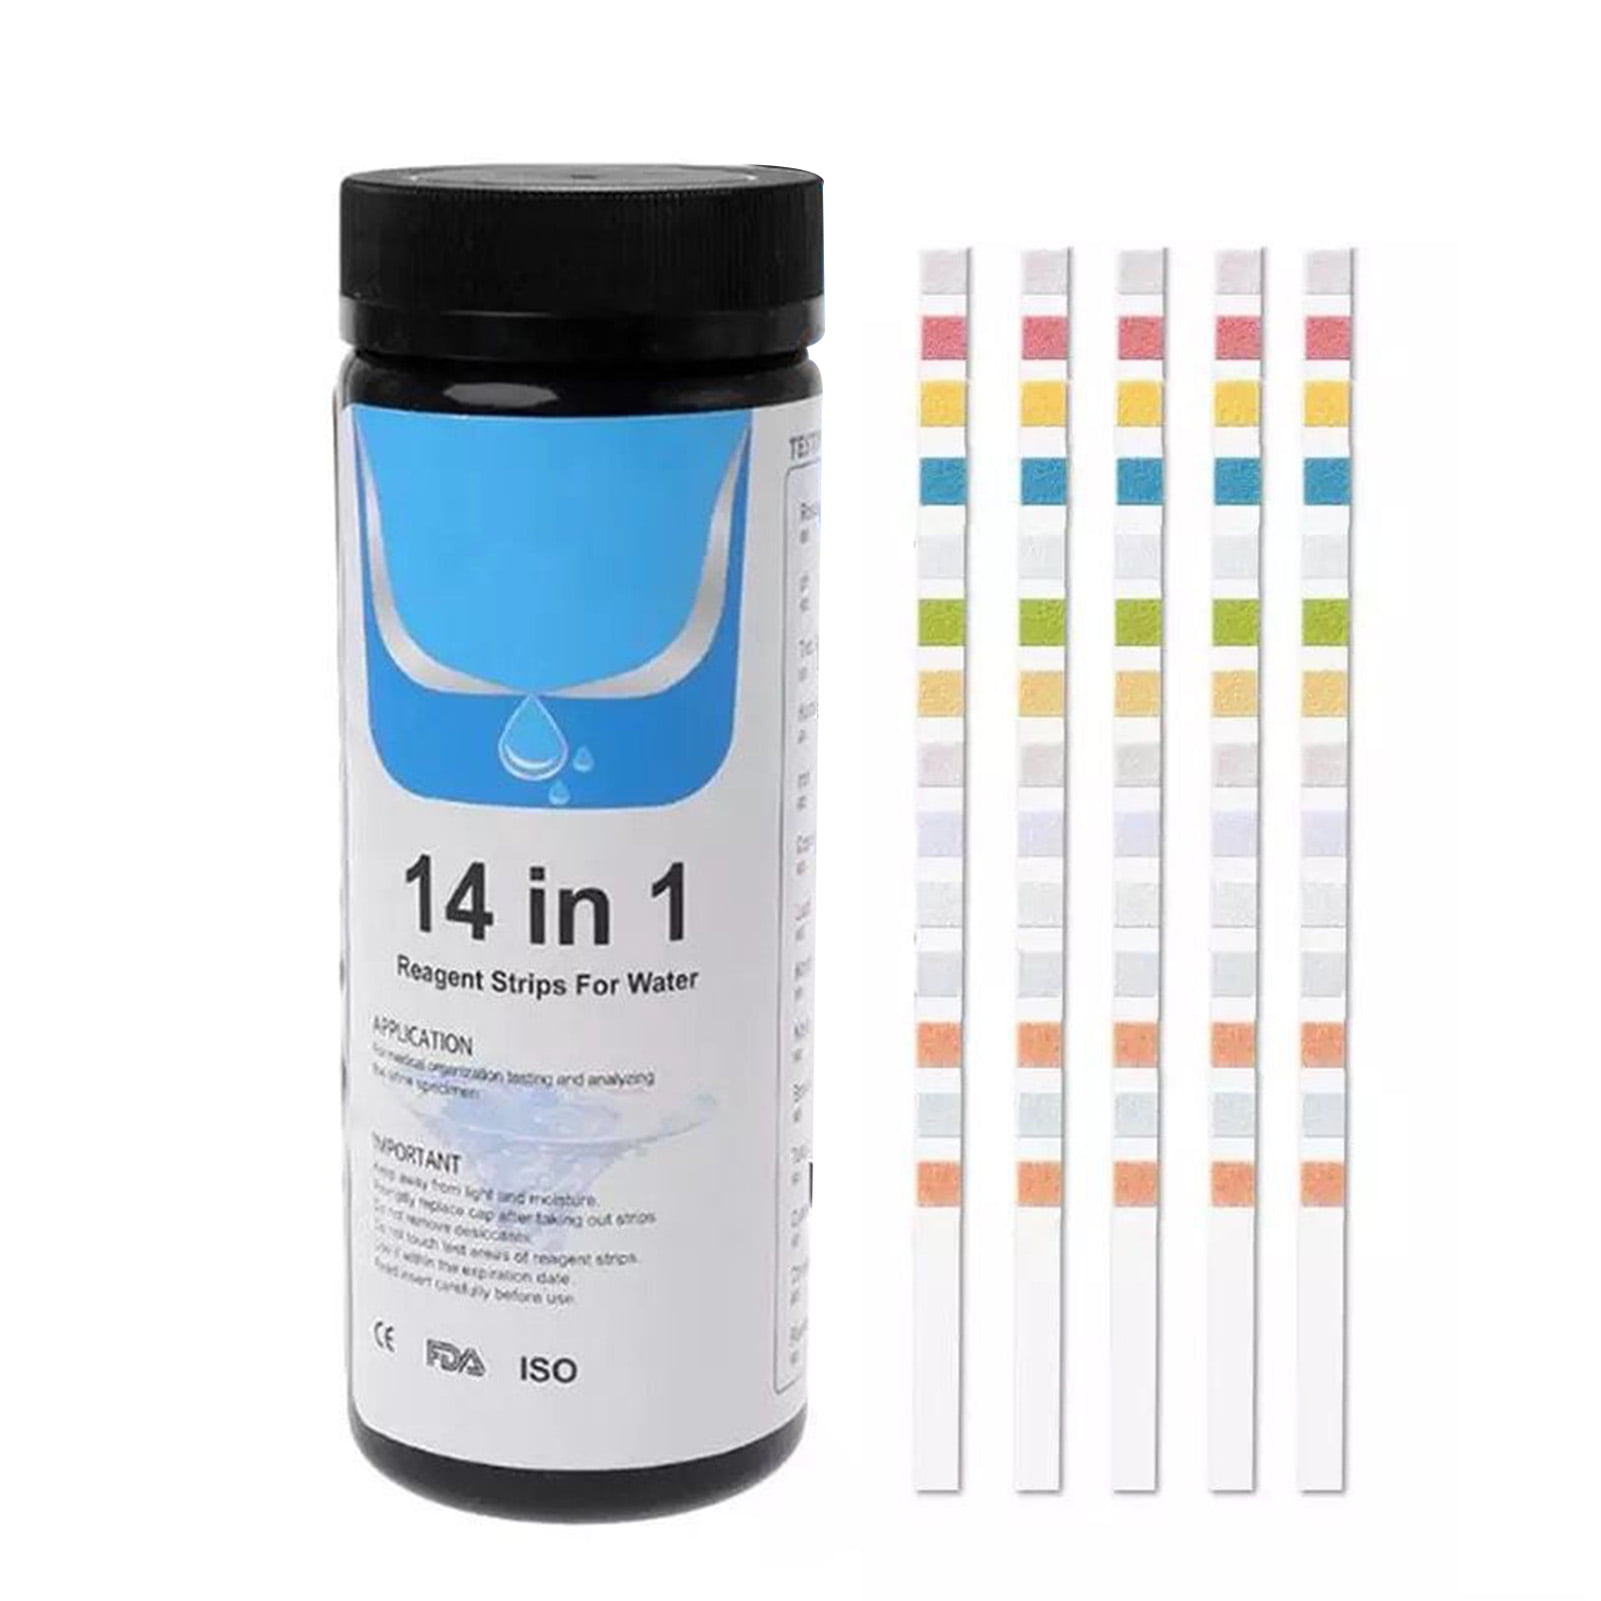 Alkalinity Details about   14 In 1 Drinking Water Test Strips Hardness Chlorine PH- Quality 